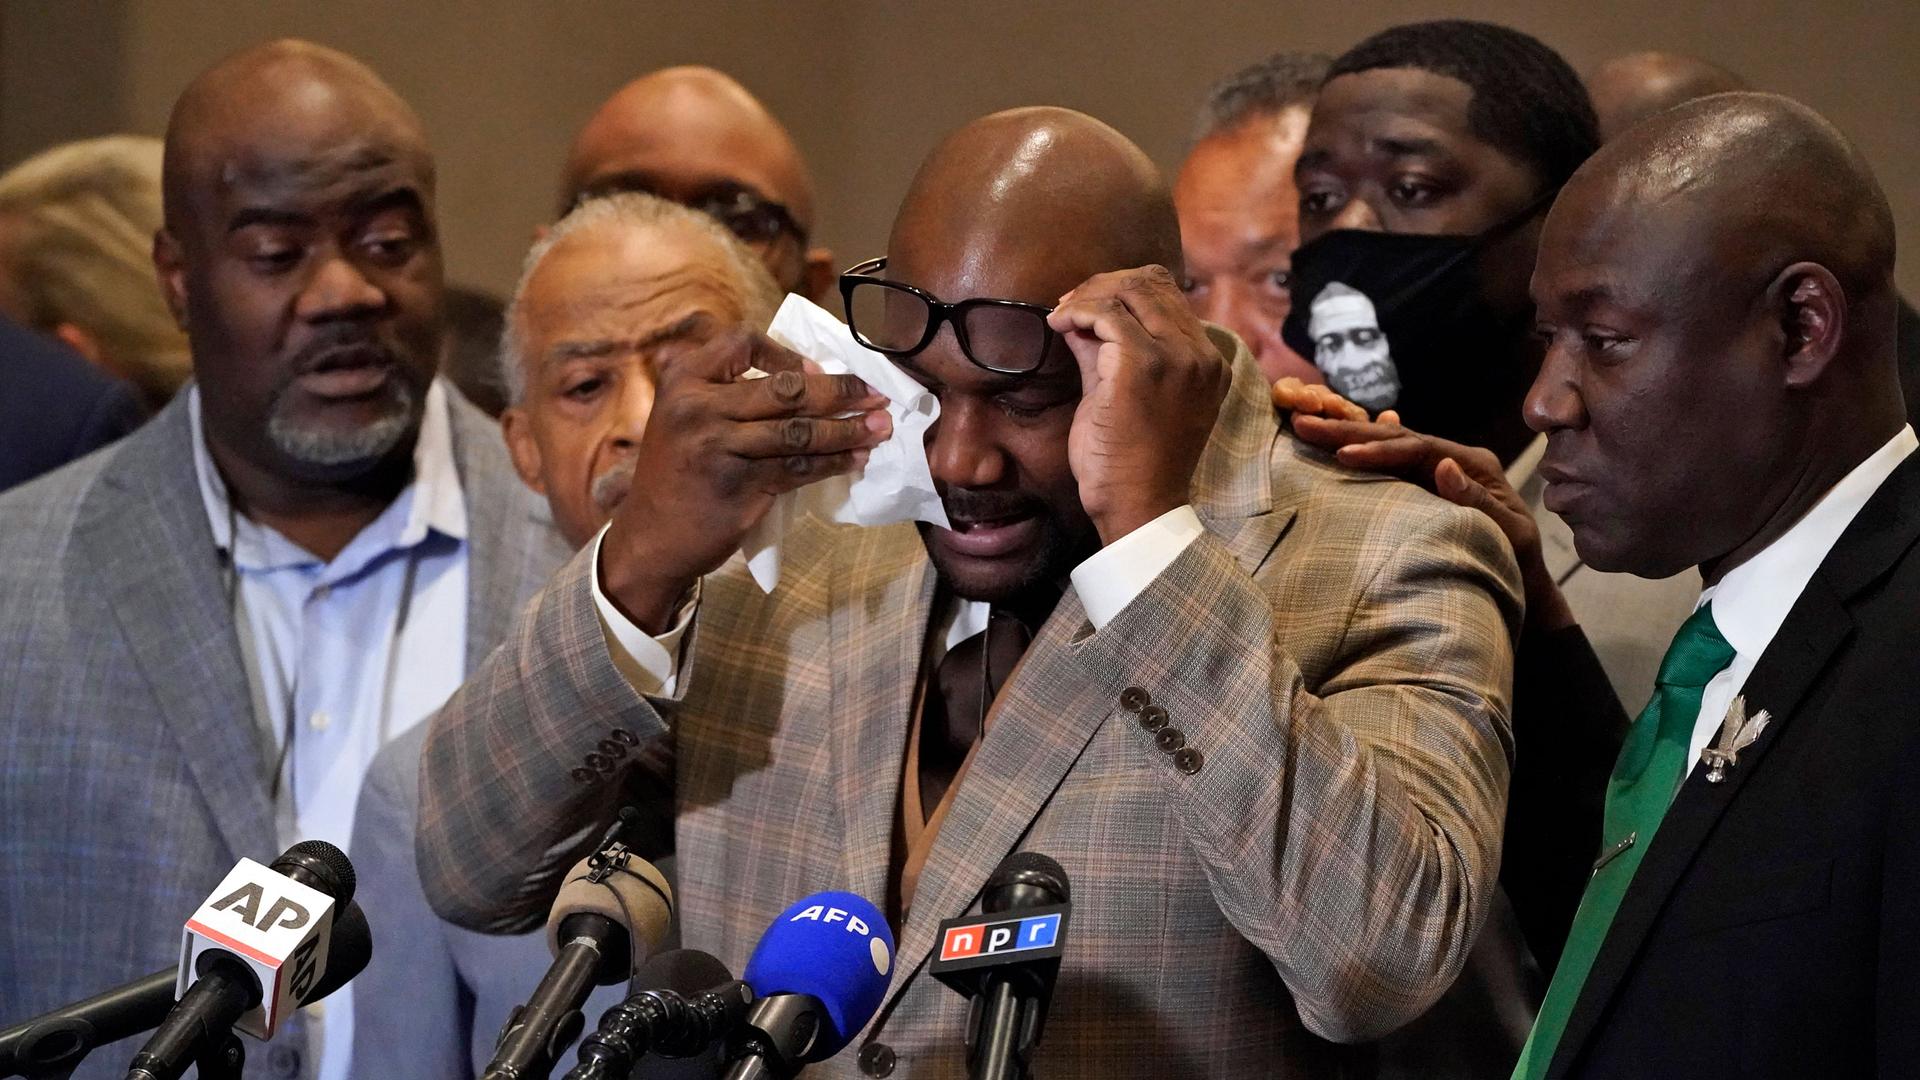 George Floyd's brother Philonise Floyd is shown lifting his dark-rimmed glasses up to wipes his eyes.